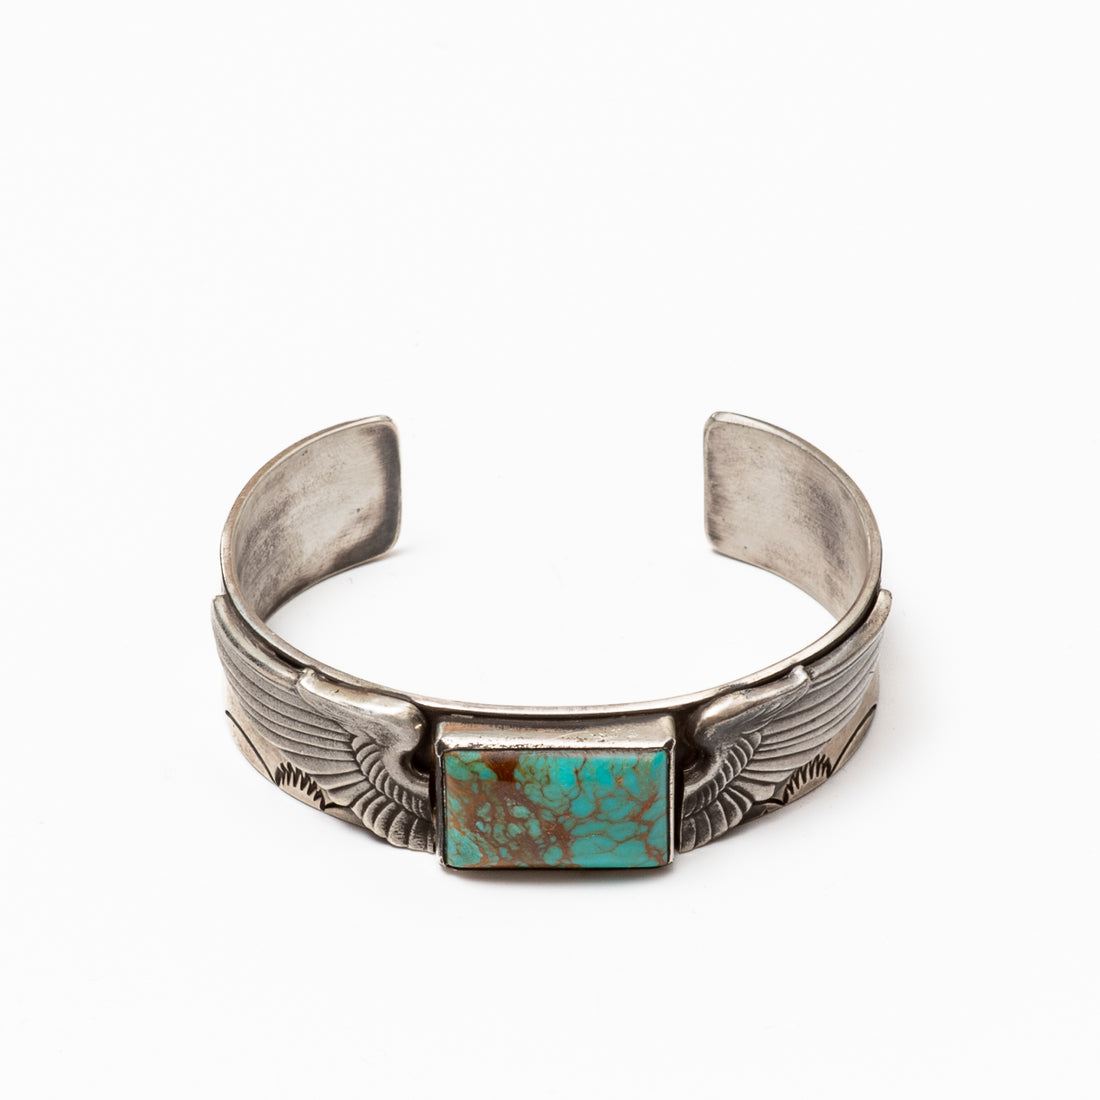 Red Rabbit Trading Co. Victory Stone Cuff